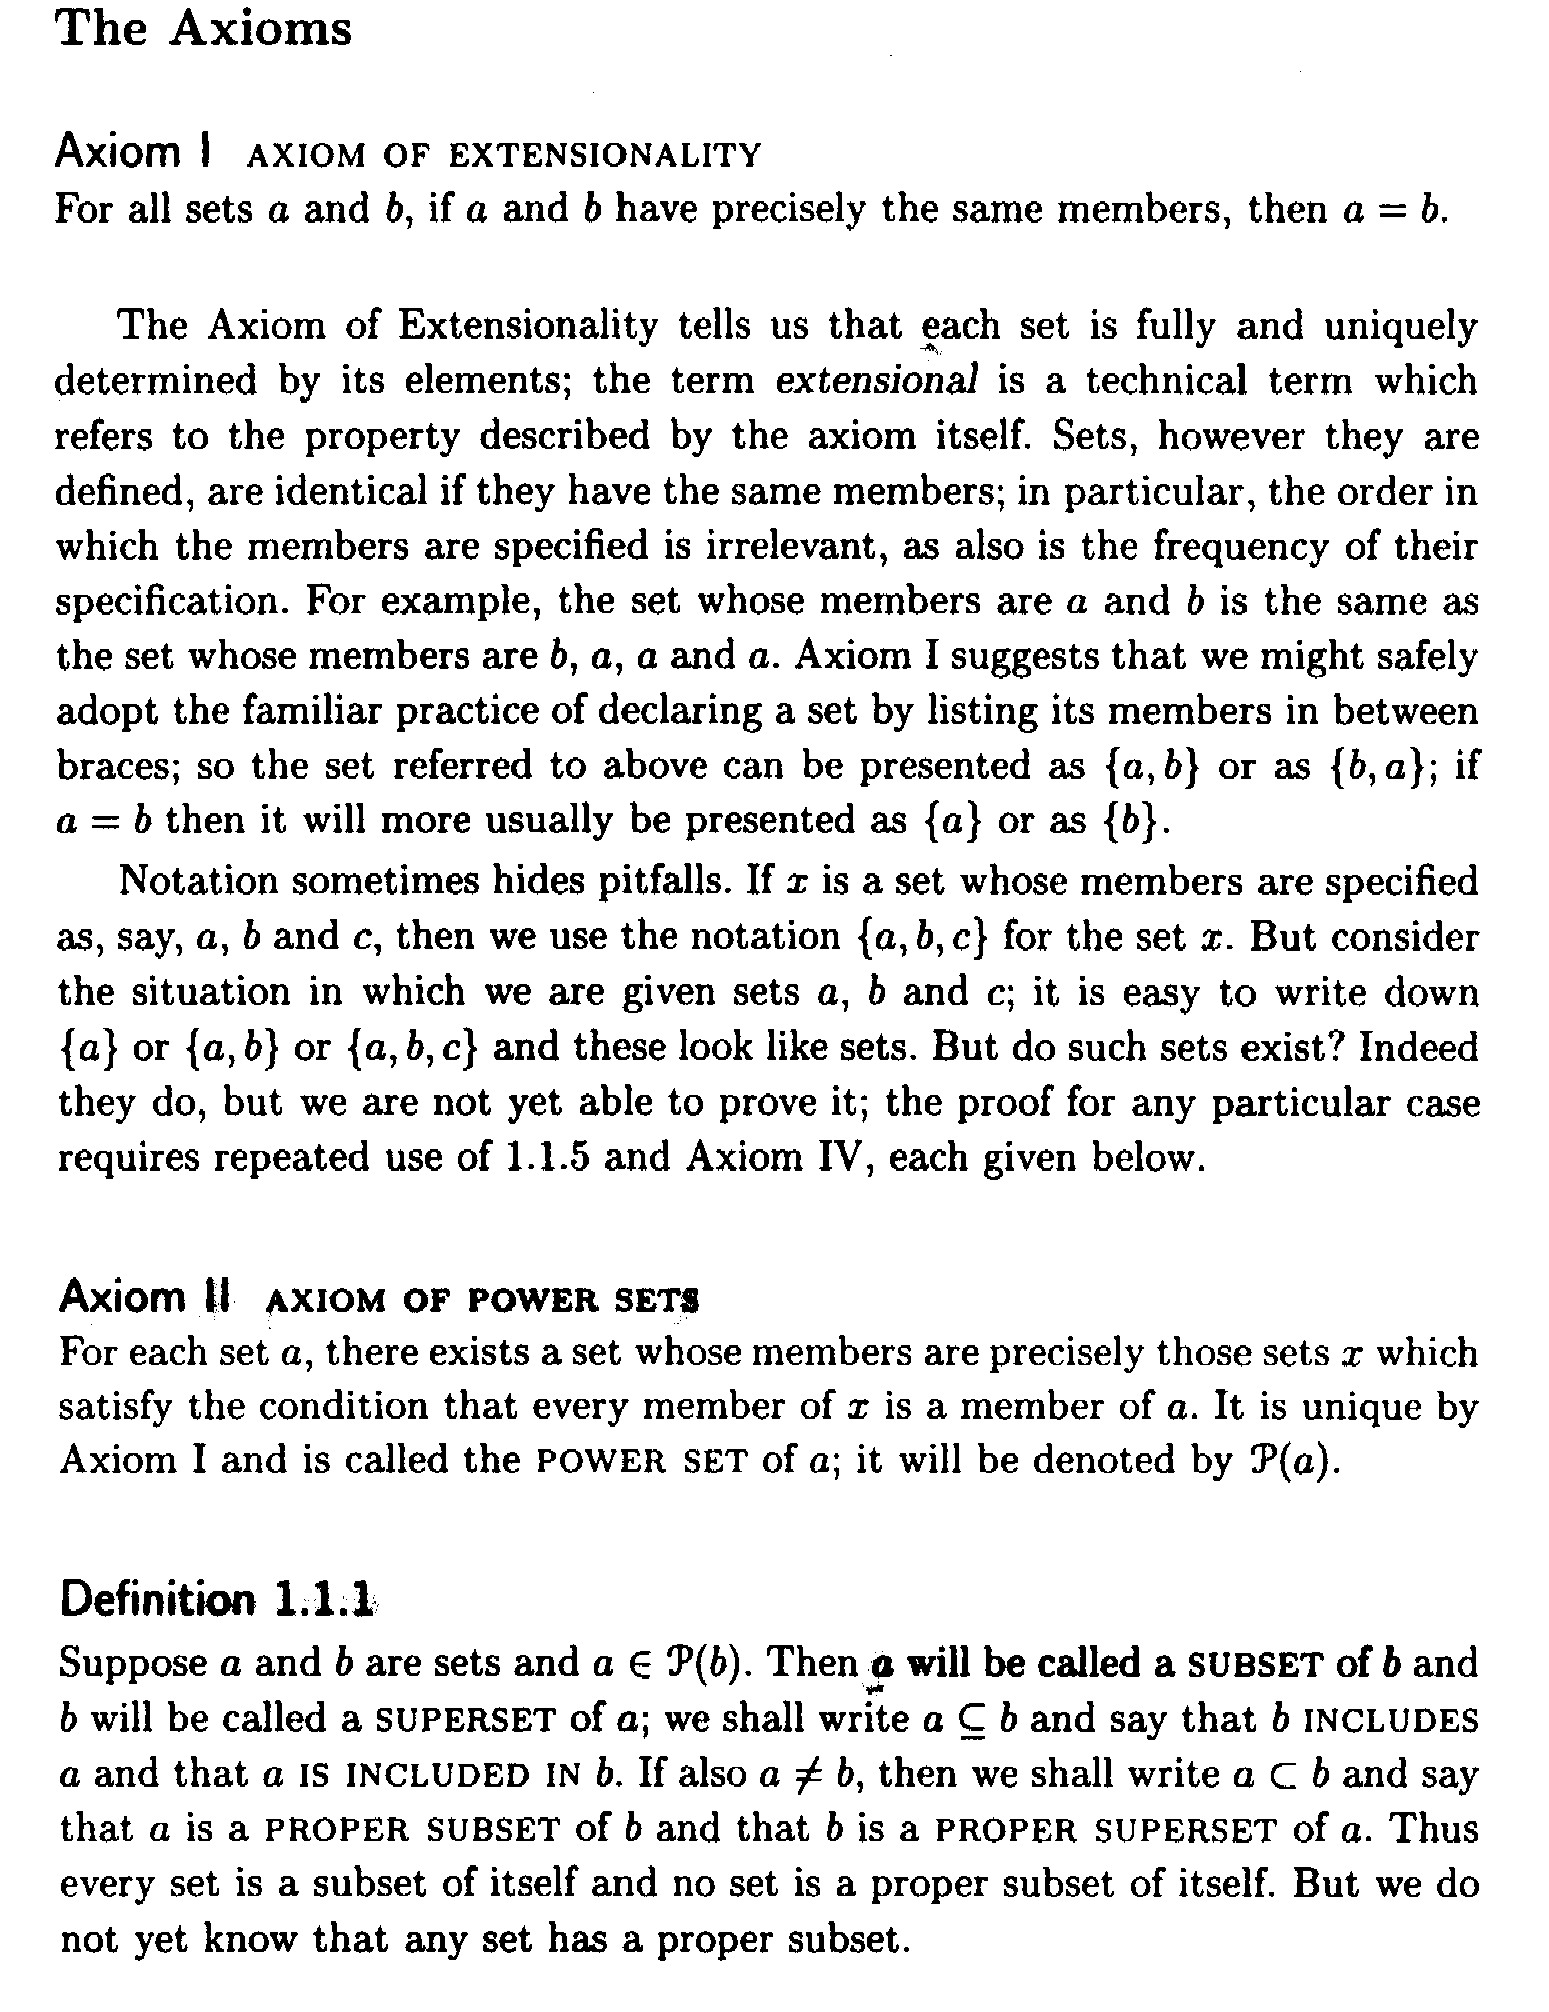 Searcoid - The Axioms ... Page 6 .png